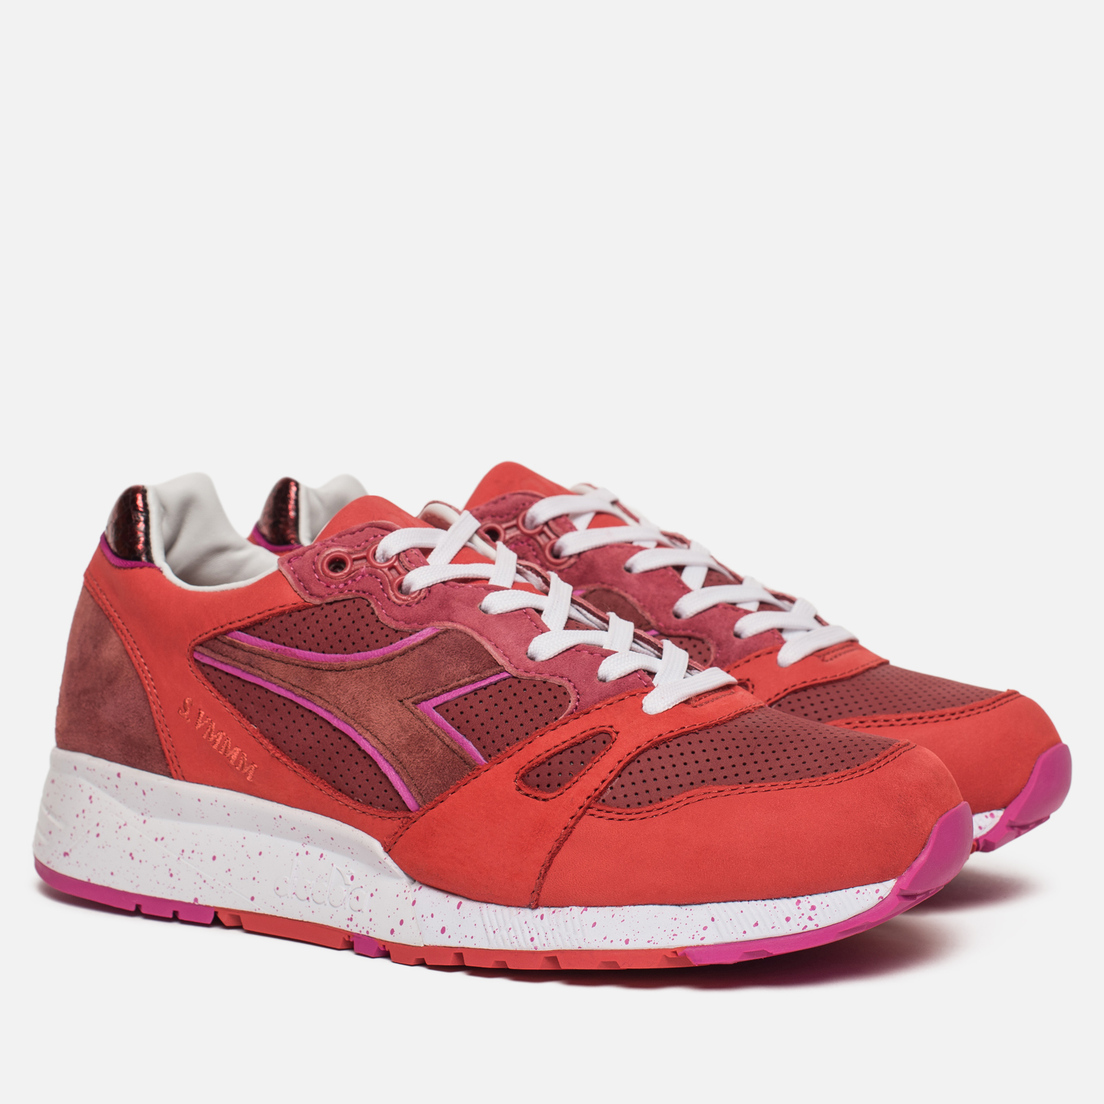 Diadora Мужские кроссовки x The Good Will Out S.8000 Nerone The Rise And Fall Pack